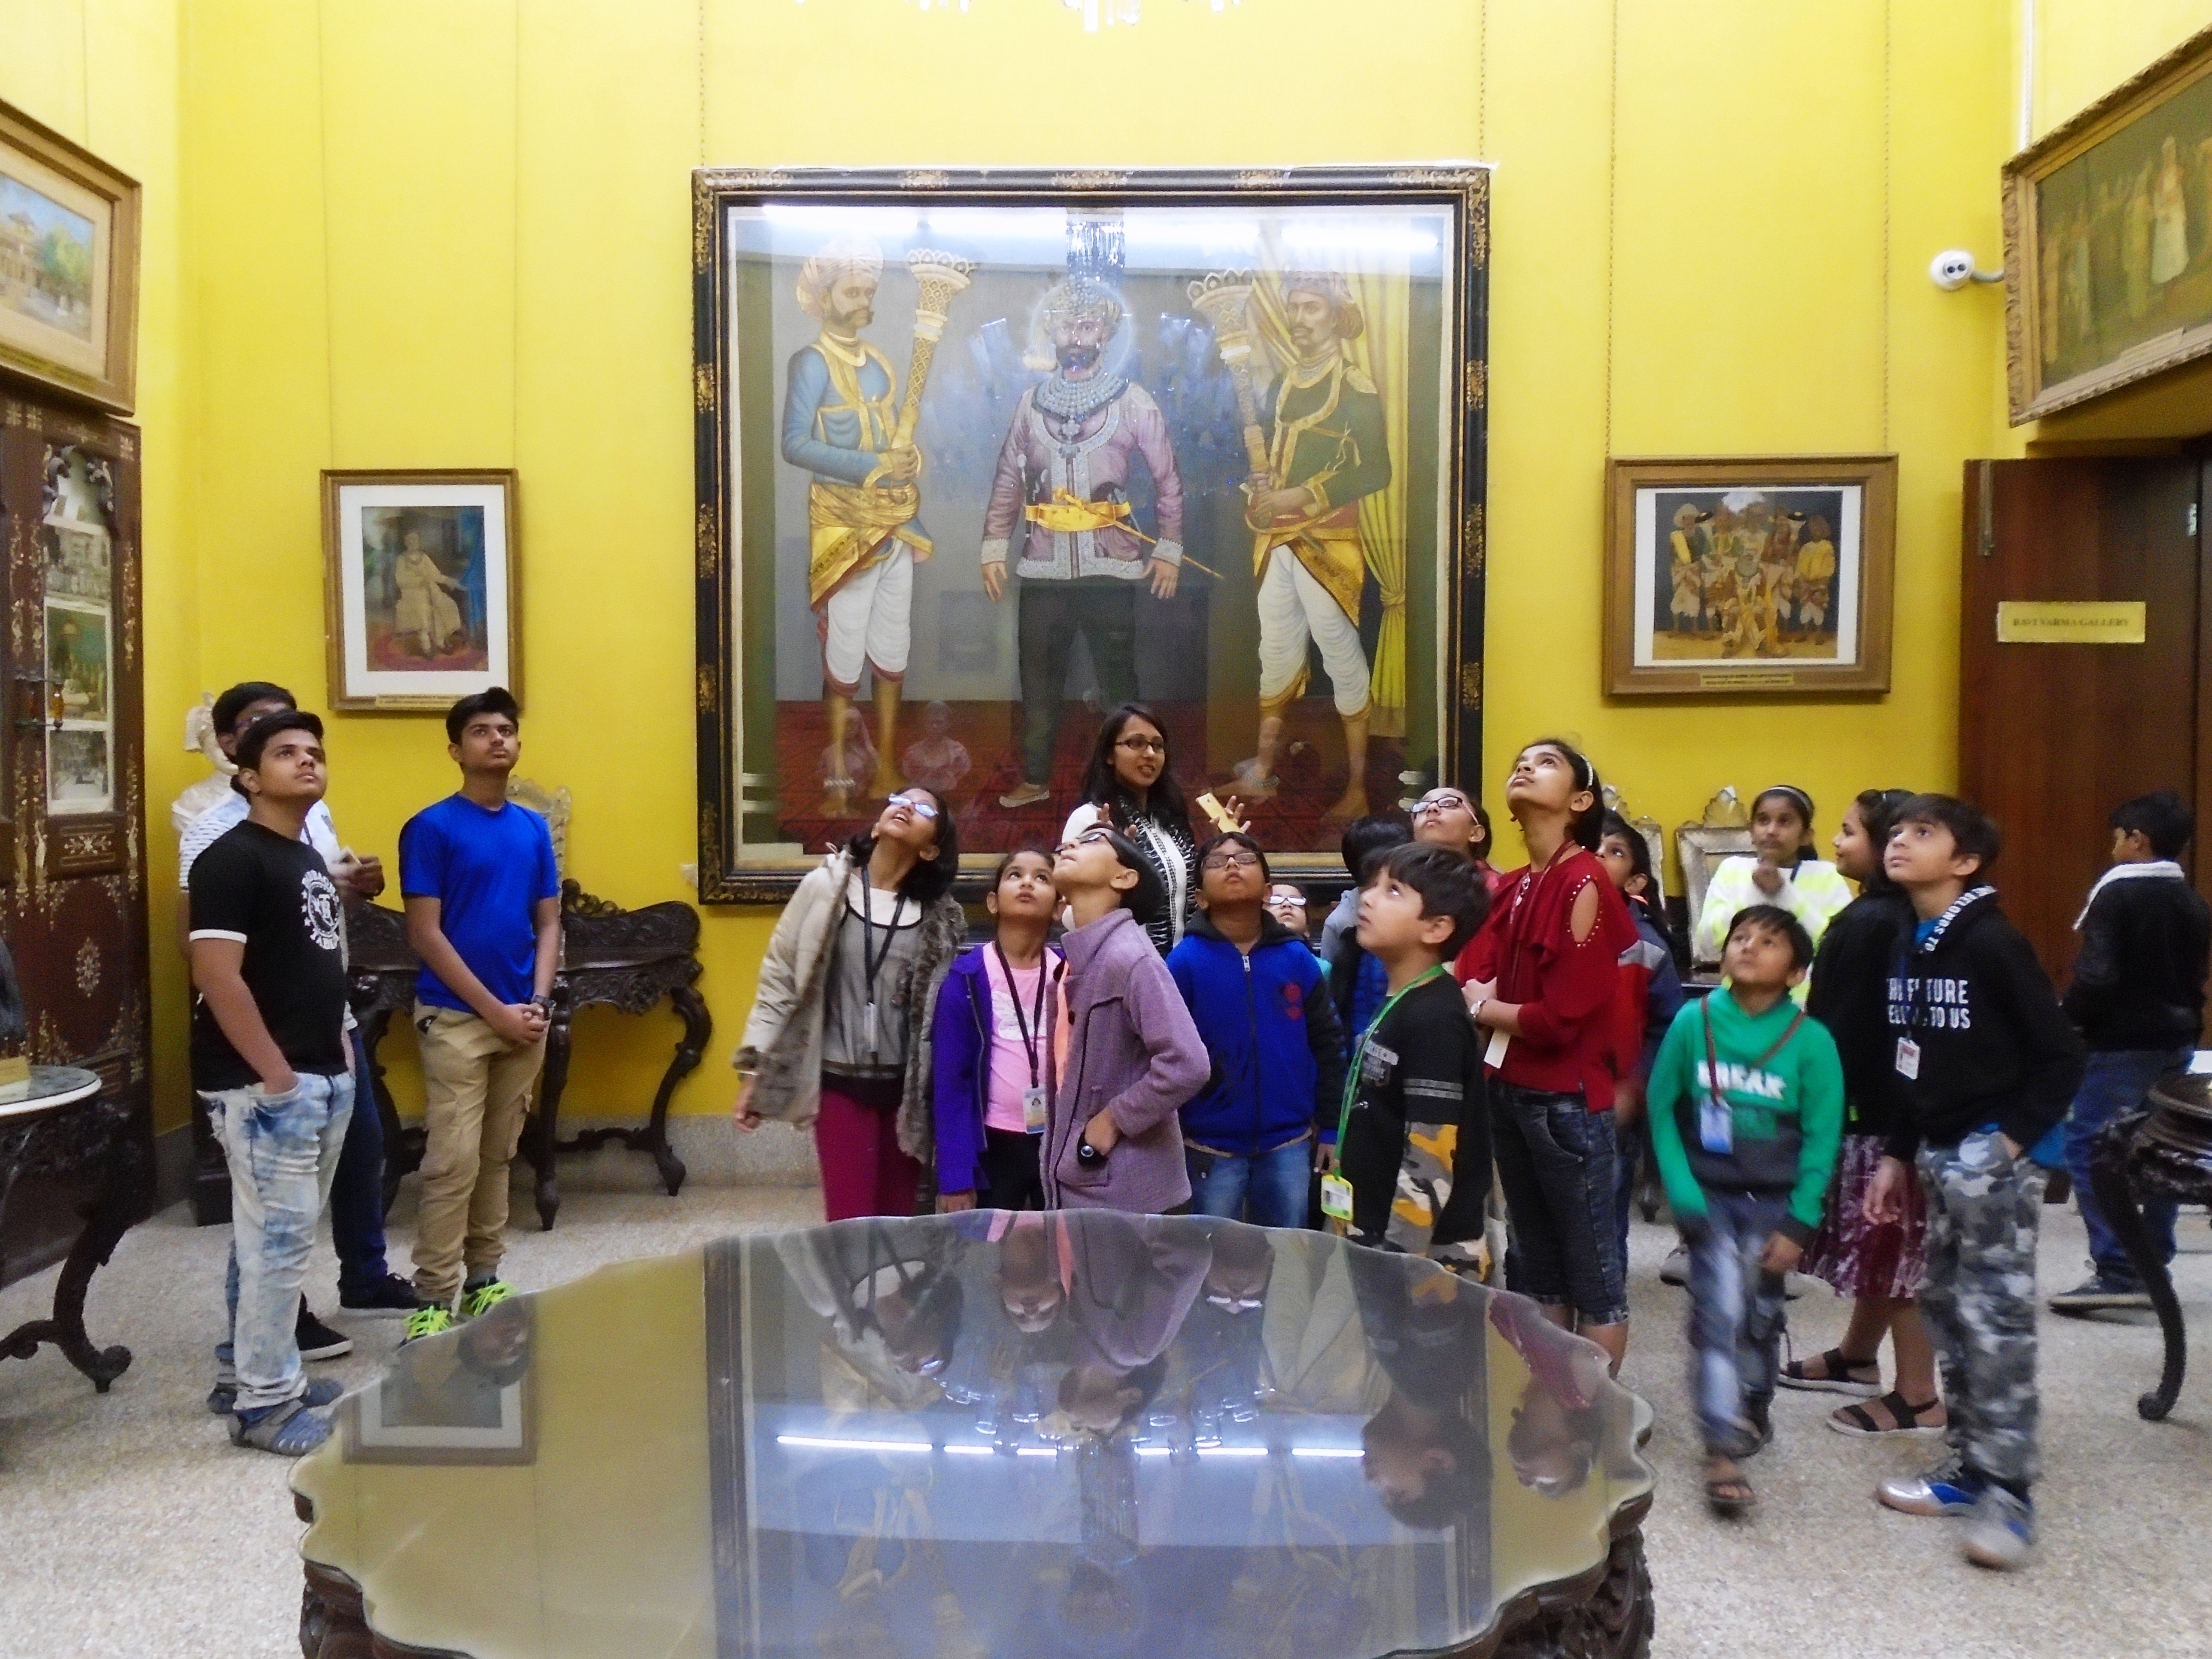 Children enjoying the Gaekwad’s collection in the ‘Old Baroda Room’ of the Maharaja Fatesingh Museum during a storytelling session.